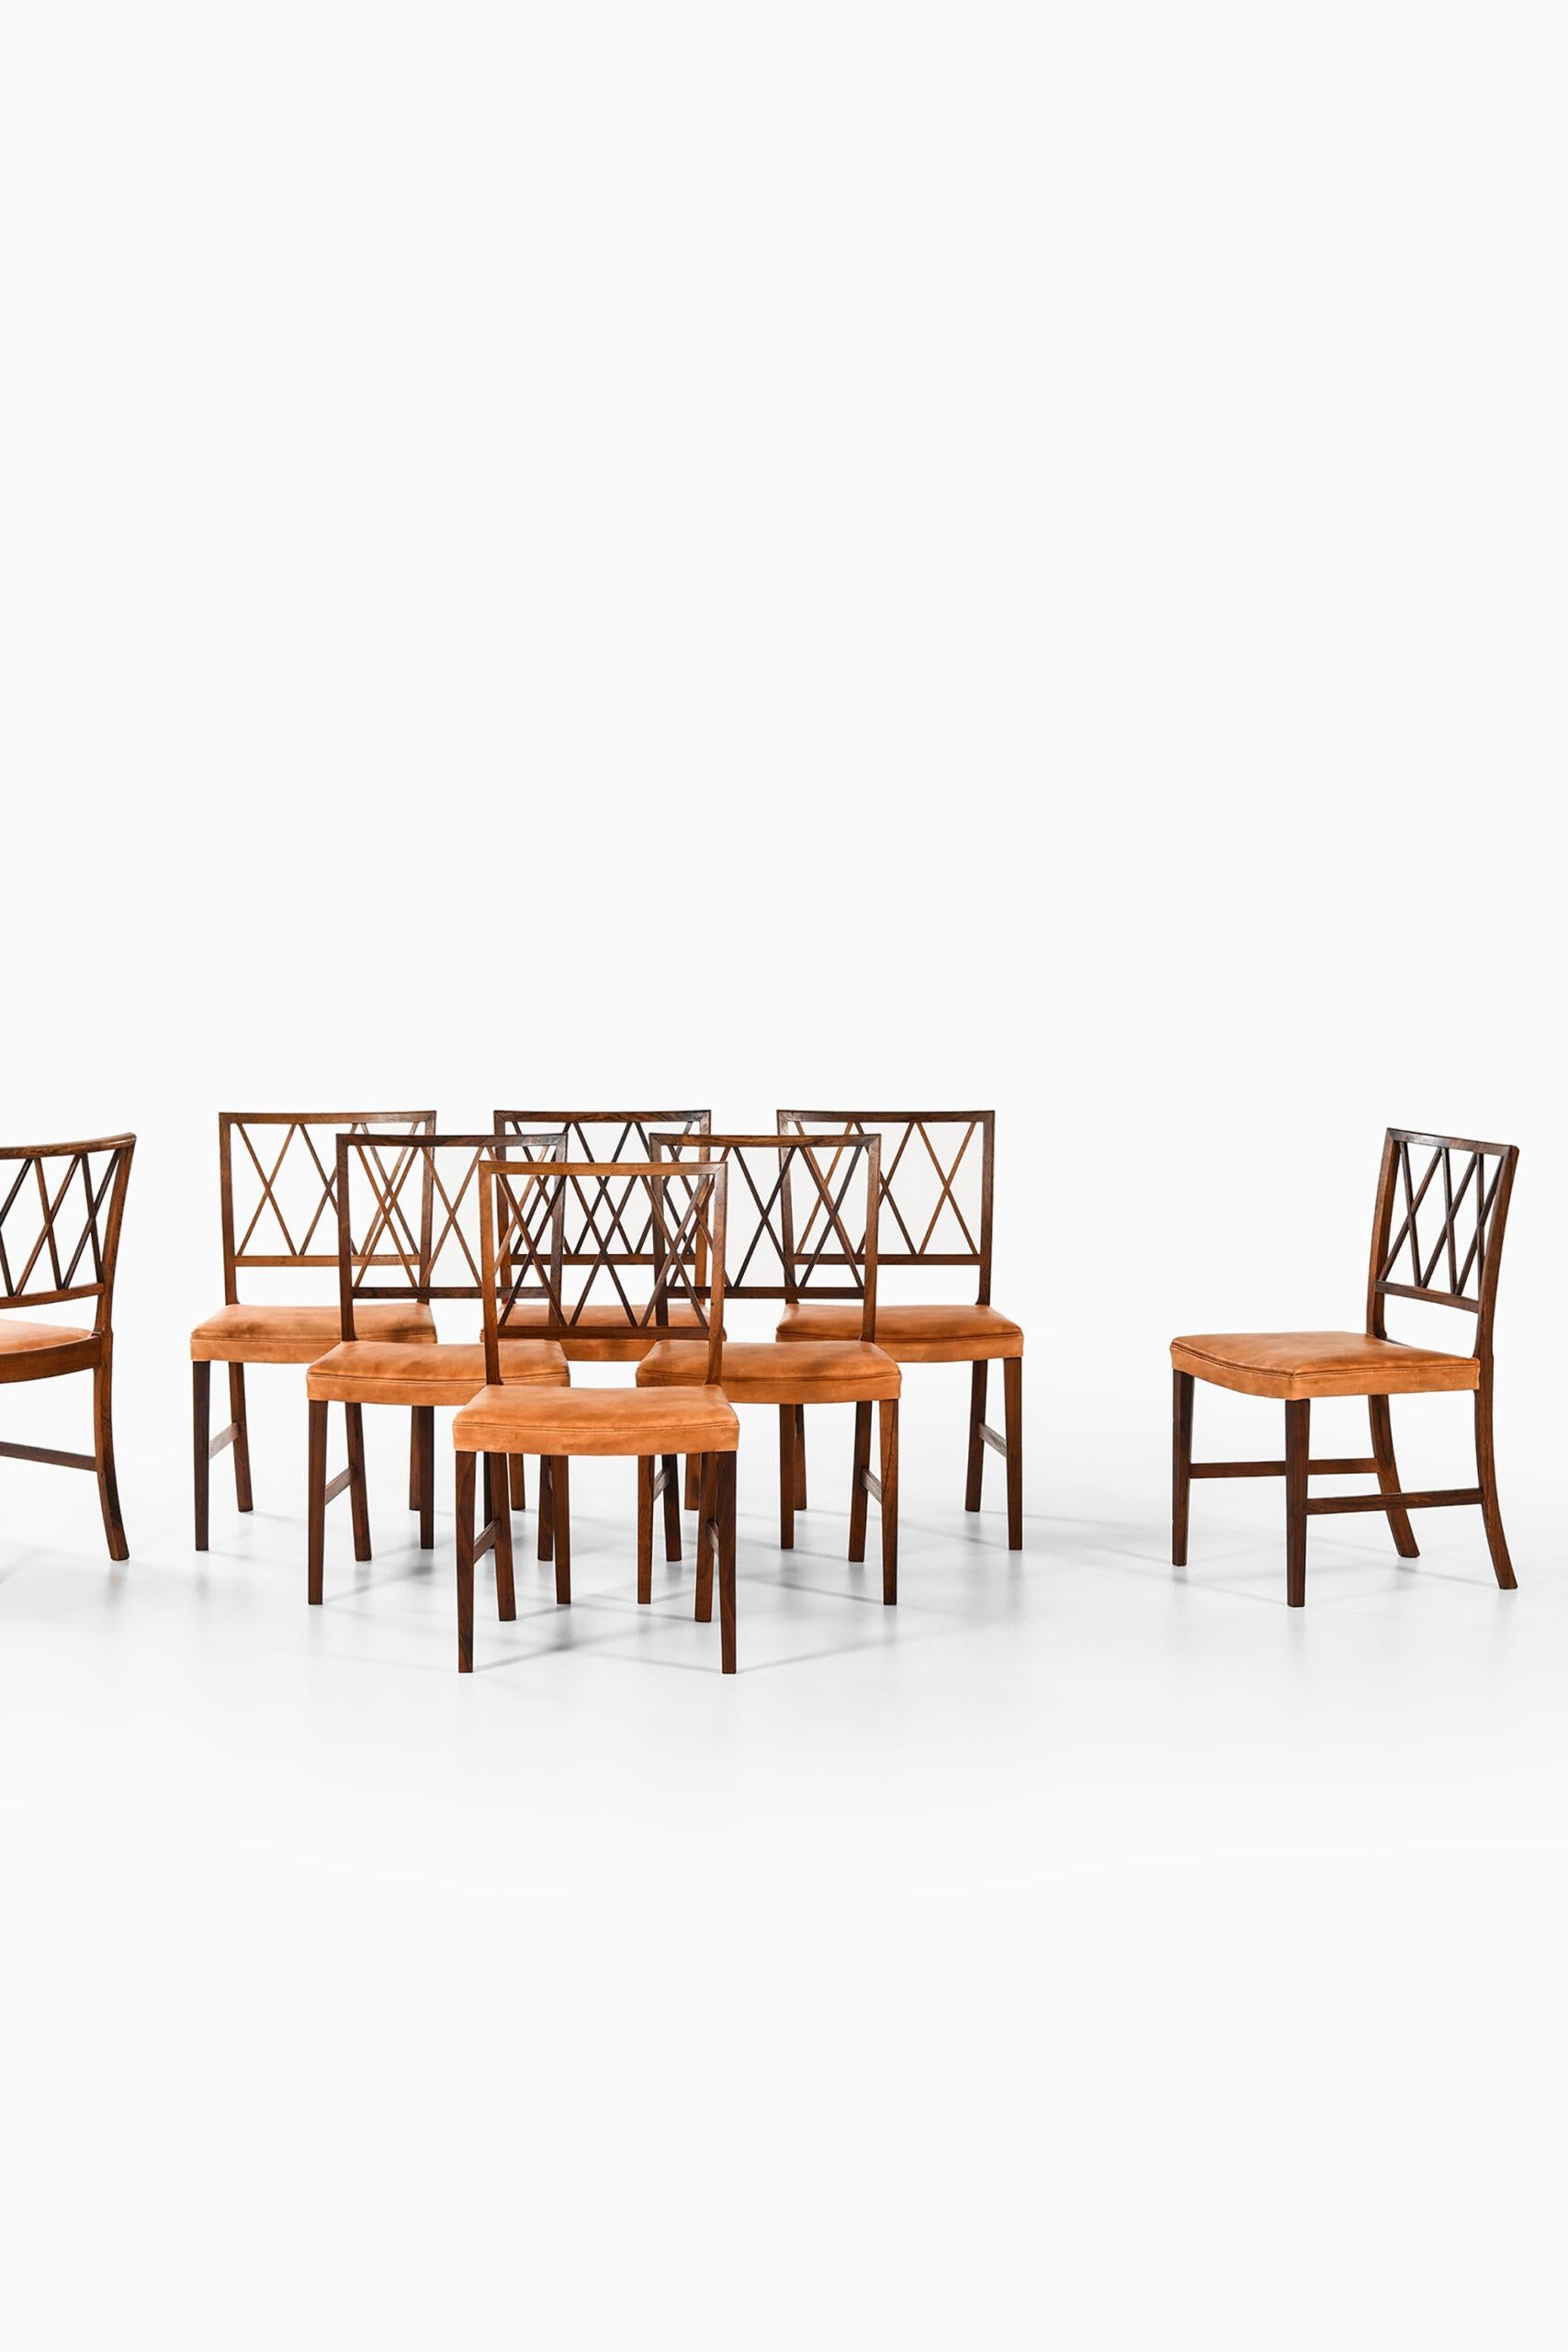 Rare set of 8 dining chairs designed by Ole Wanscher. Produced by cabinetmaker A.J. Iversen in Denmark.